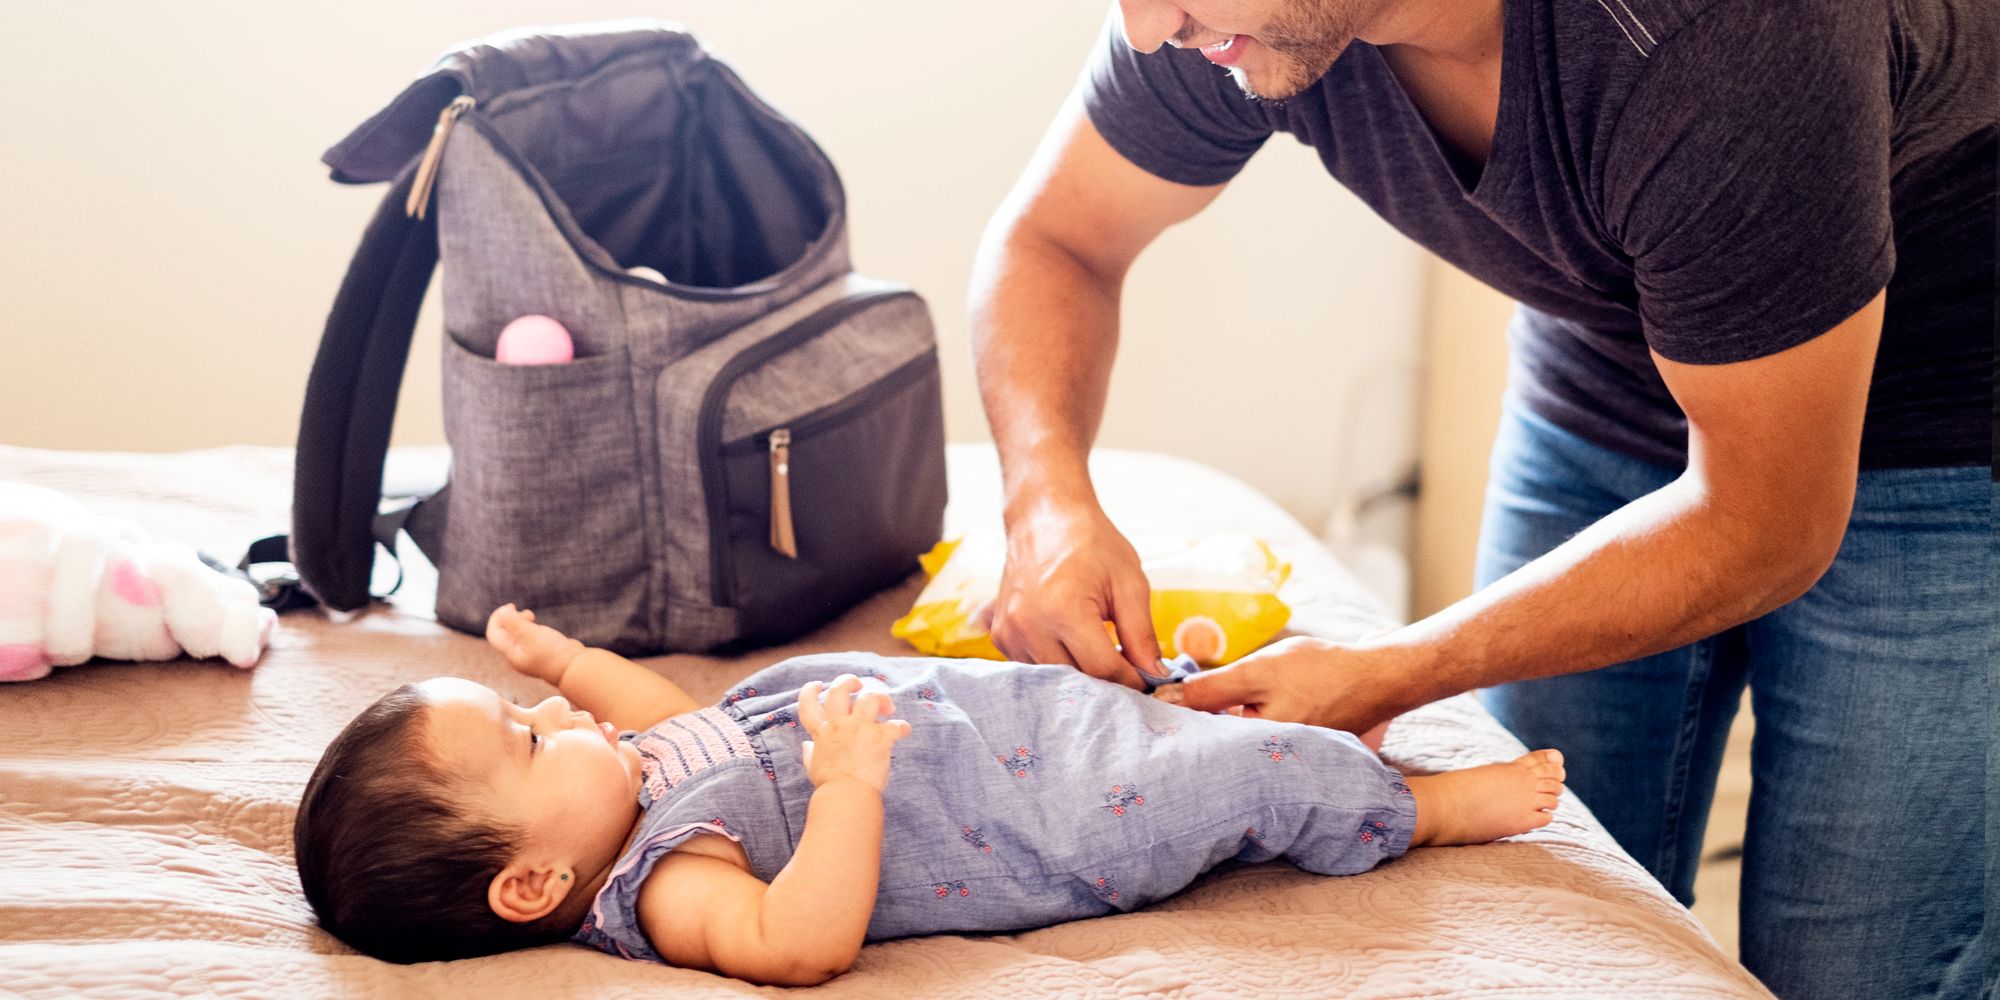 15 Best Diaper Bags and Backpacks For Every Parent in 2023